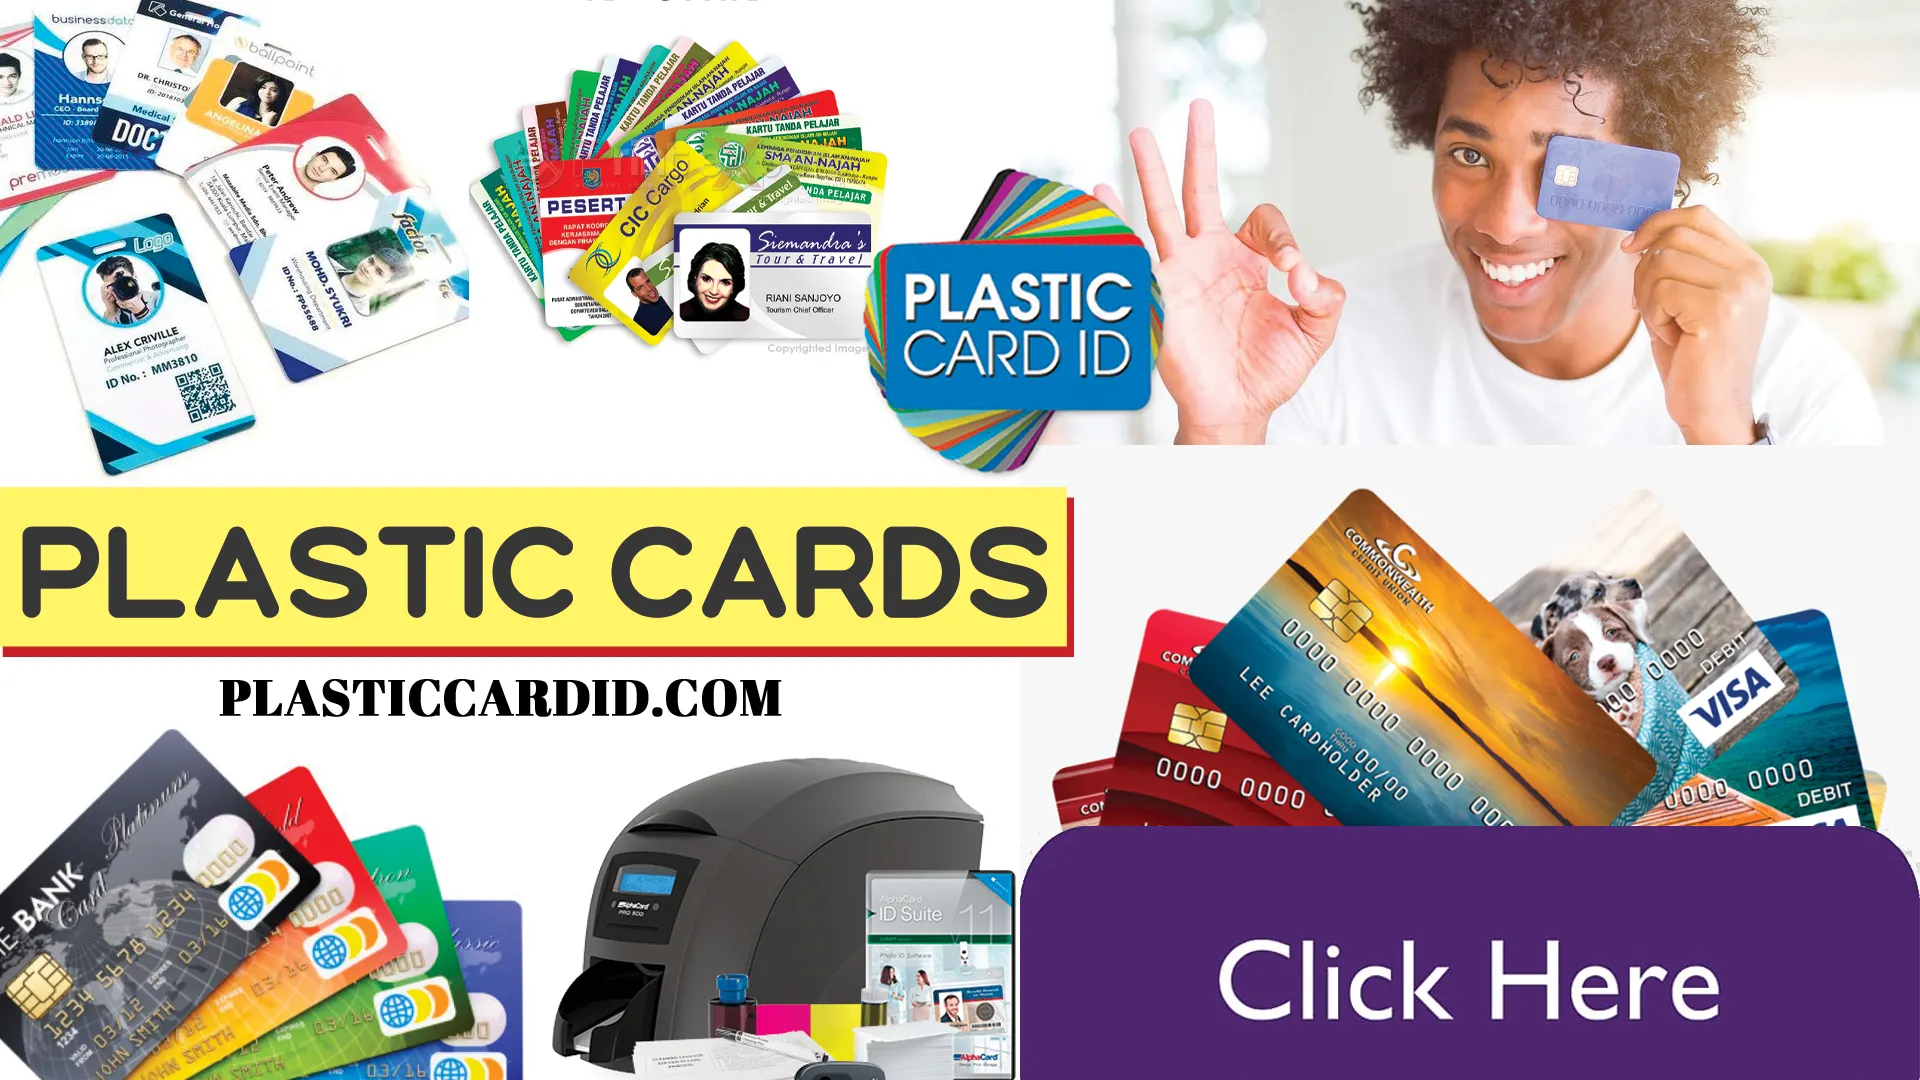 Expert Tips to Keep Your Plastic Cards Pristine